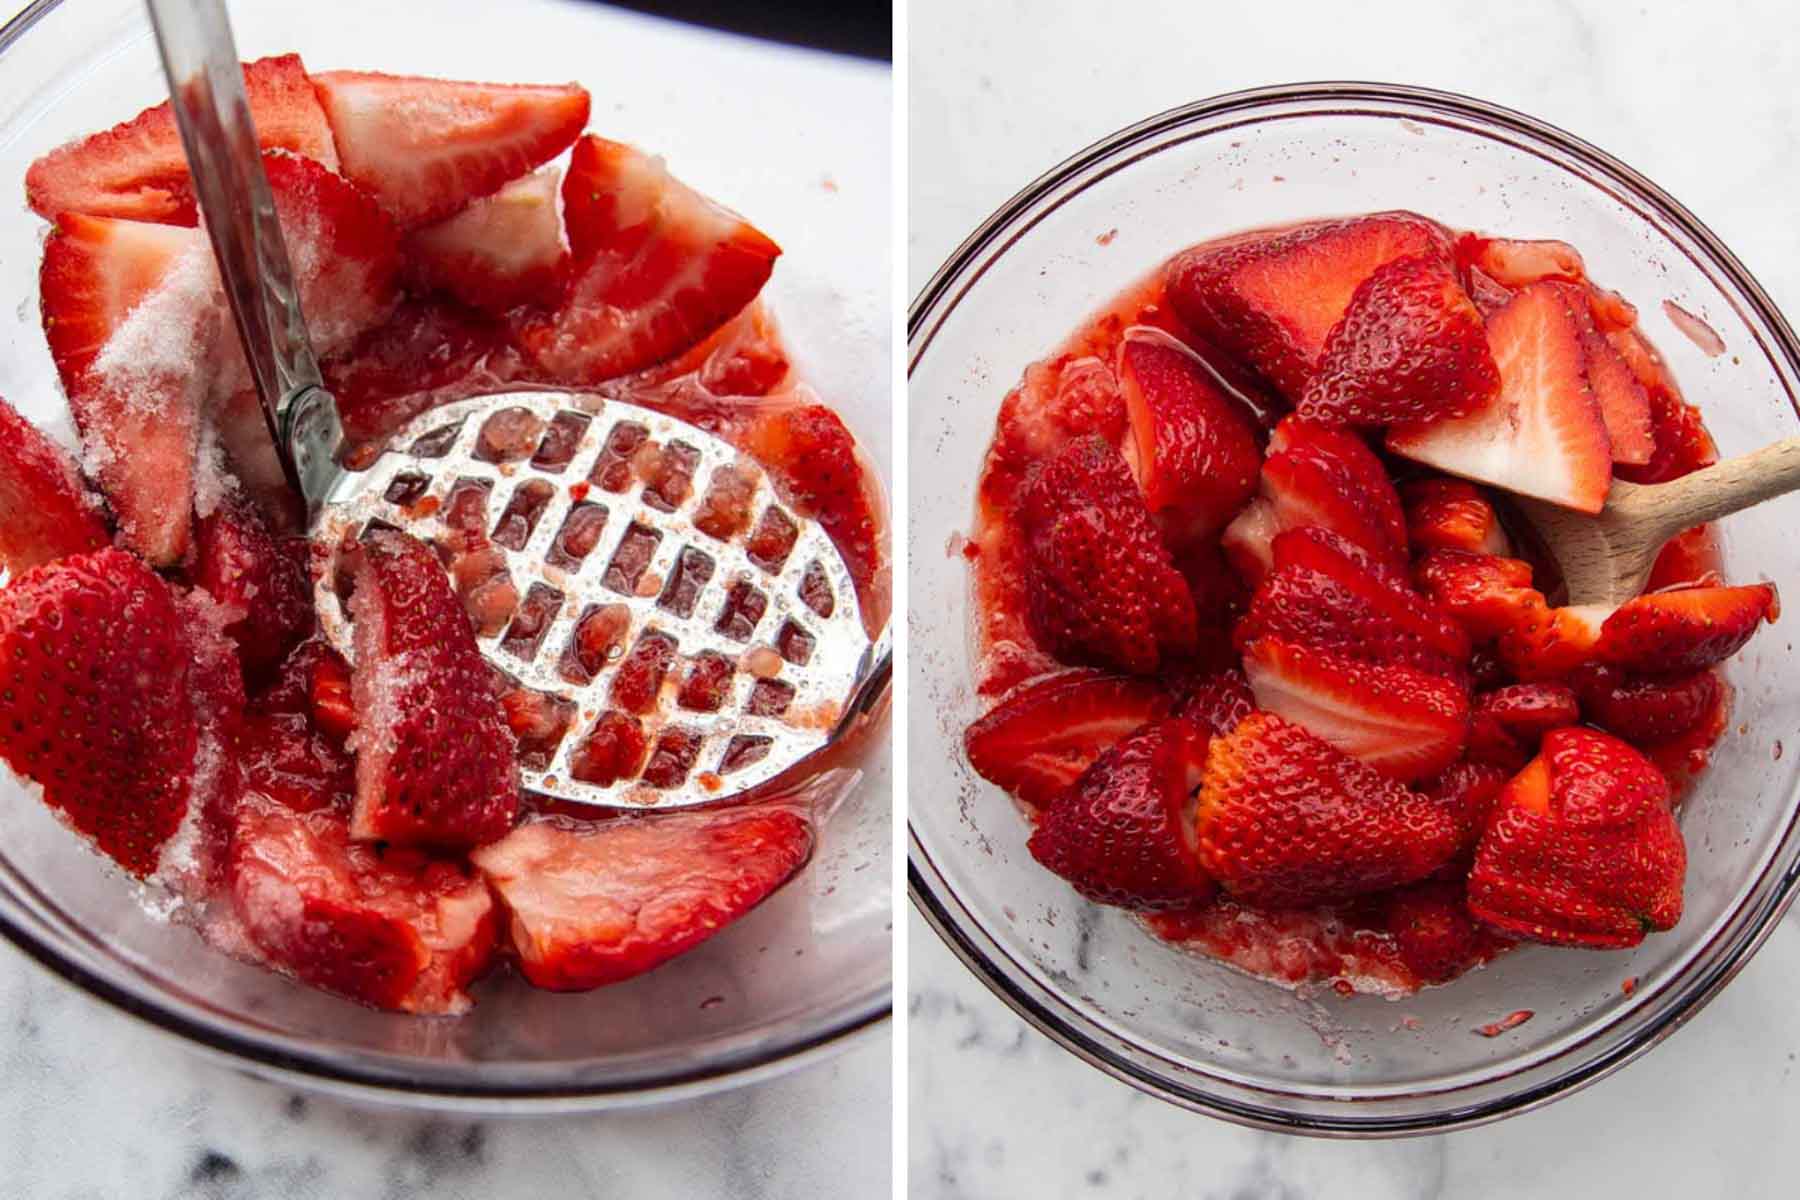 images showing how to make the strawberry sauce